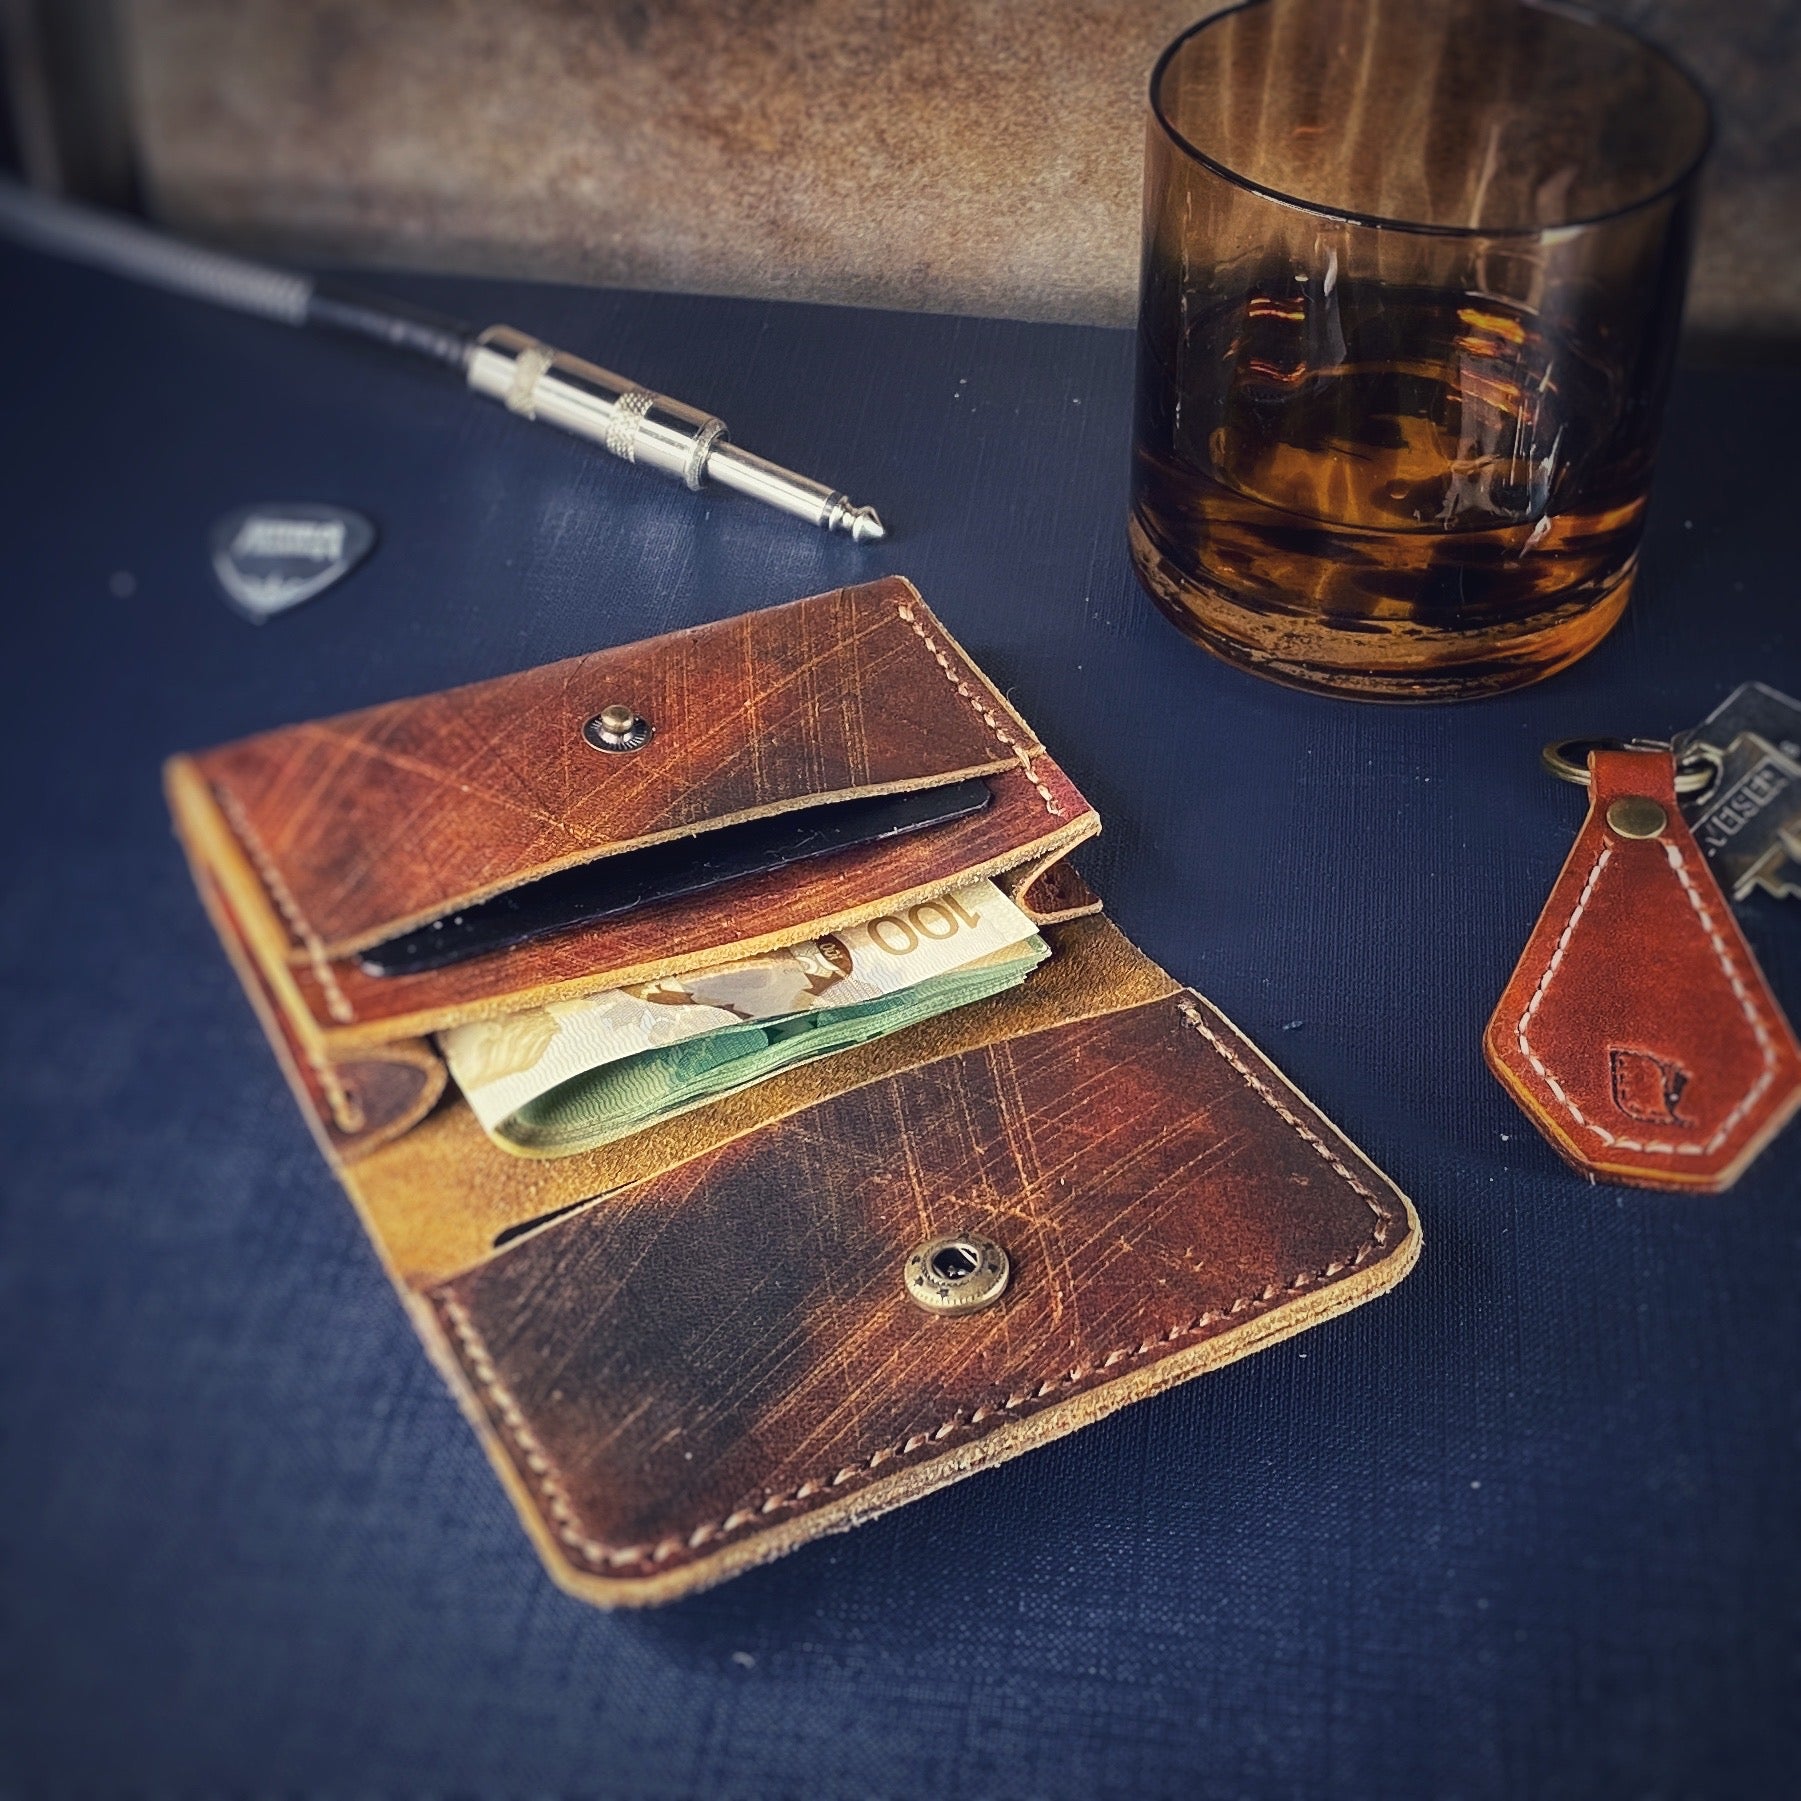 A locust card holder made from distressed leather dyed English tan with tan stitching. Around the wallet are a leather keyfob, a glass with some liquid in it, the end of a guitar cord and a Metallica guitar pick.